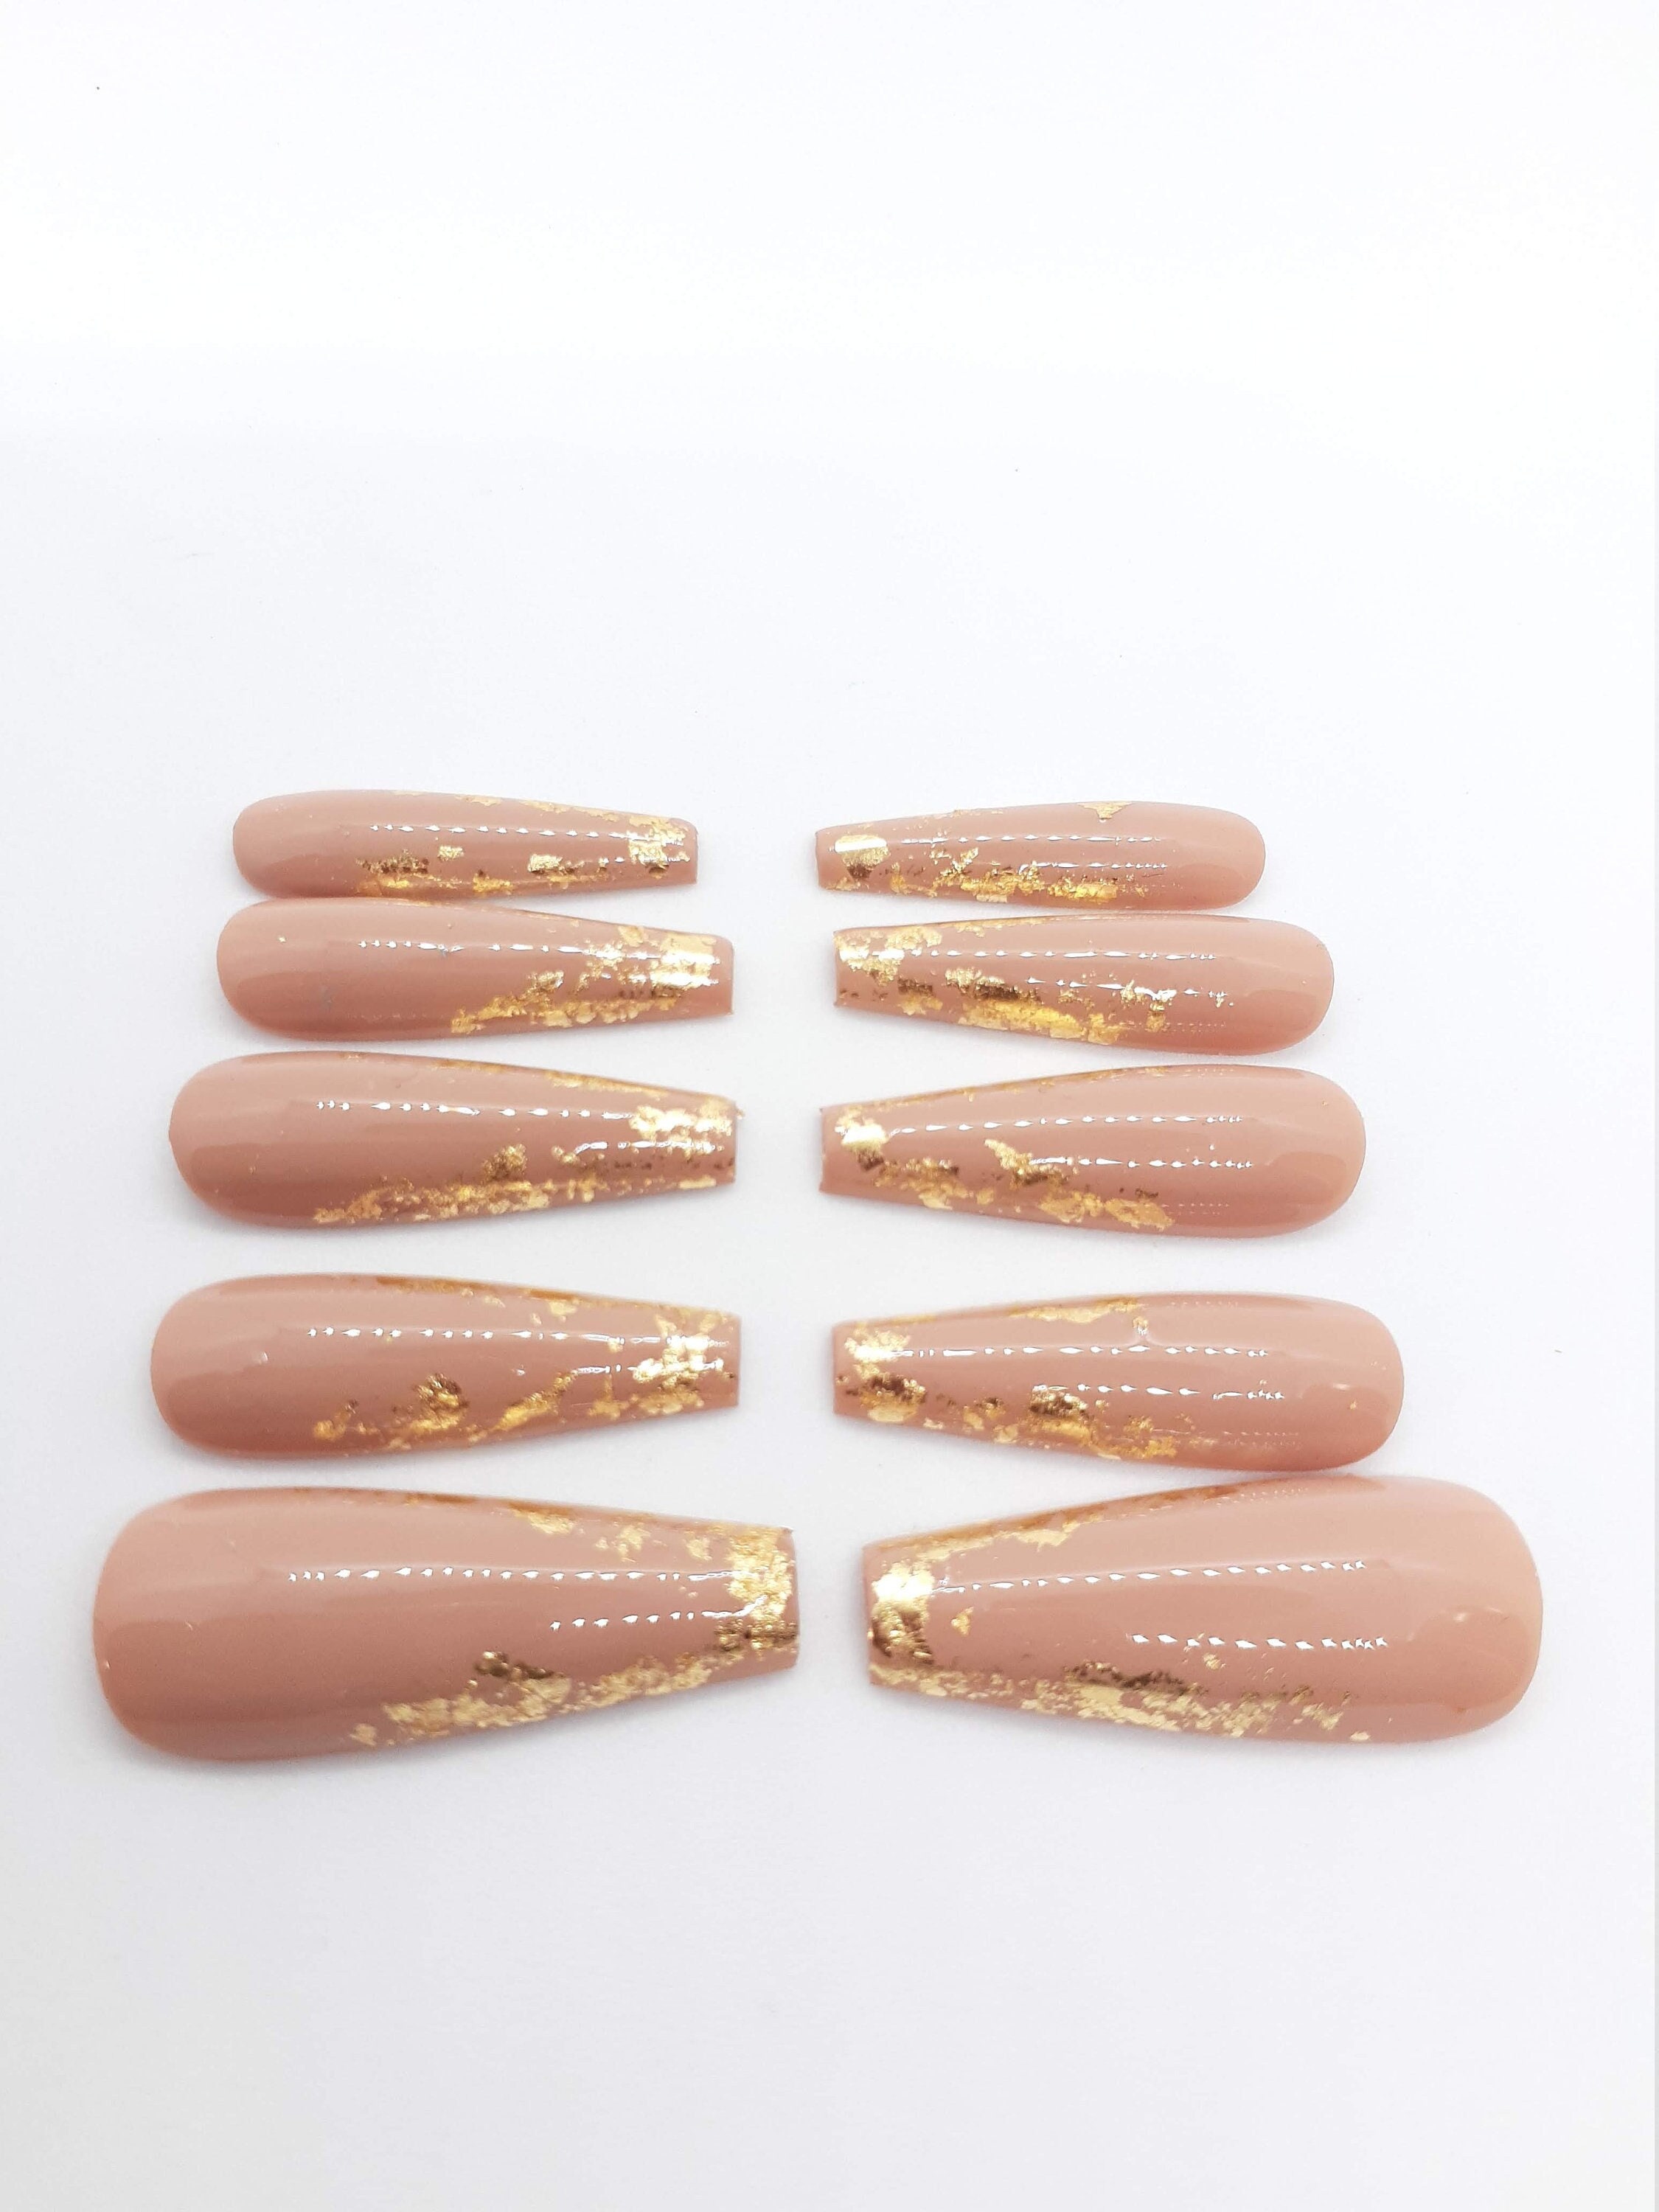 Nude and Gold Nails - Etsy